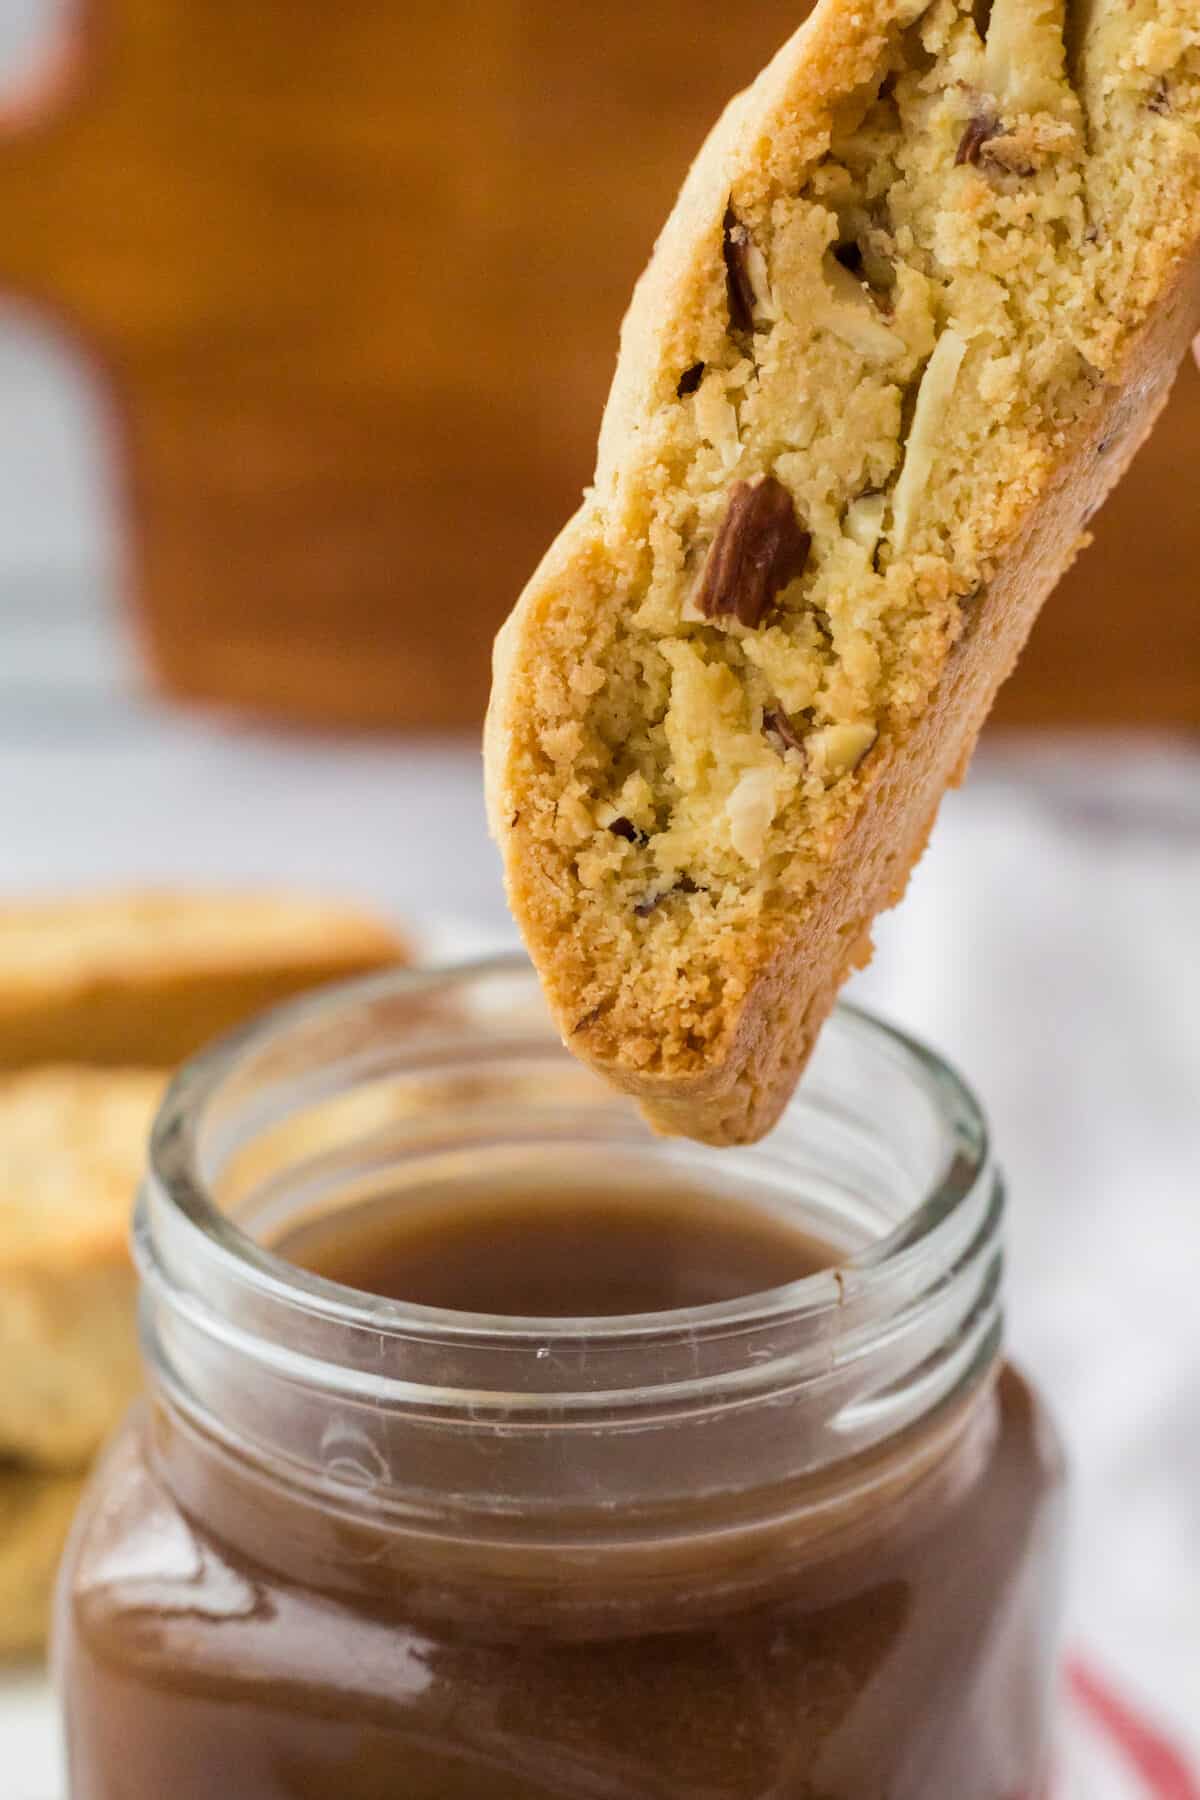 dunking an almond biscotti into a cup of coffee.